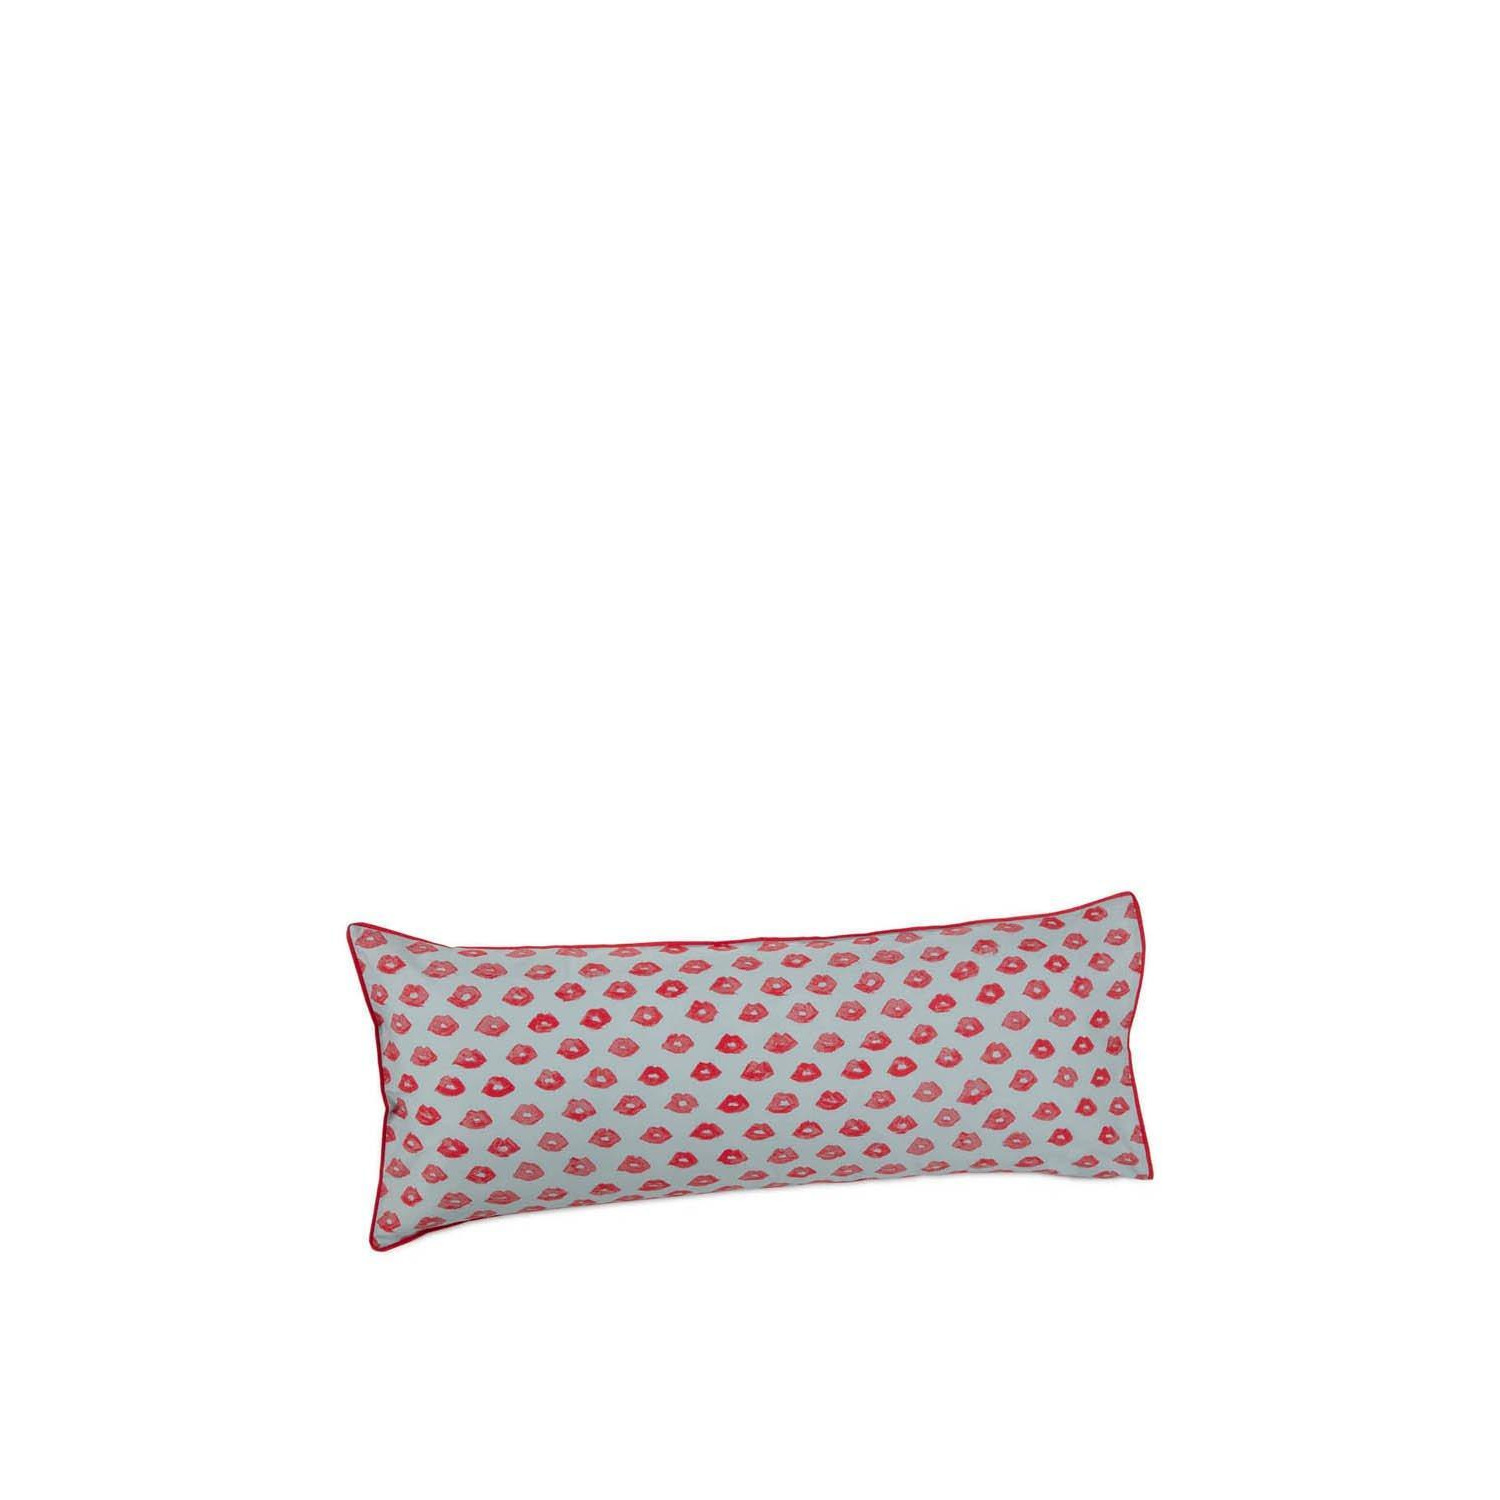 Red Painted Lips Body Pillow - image 1